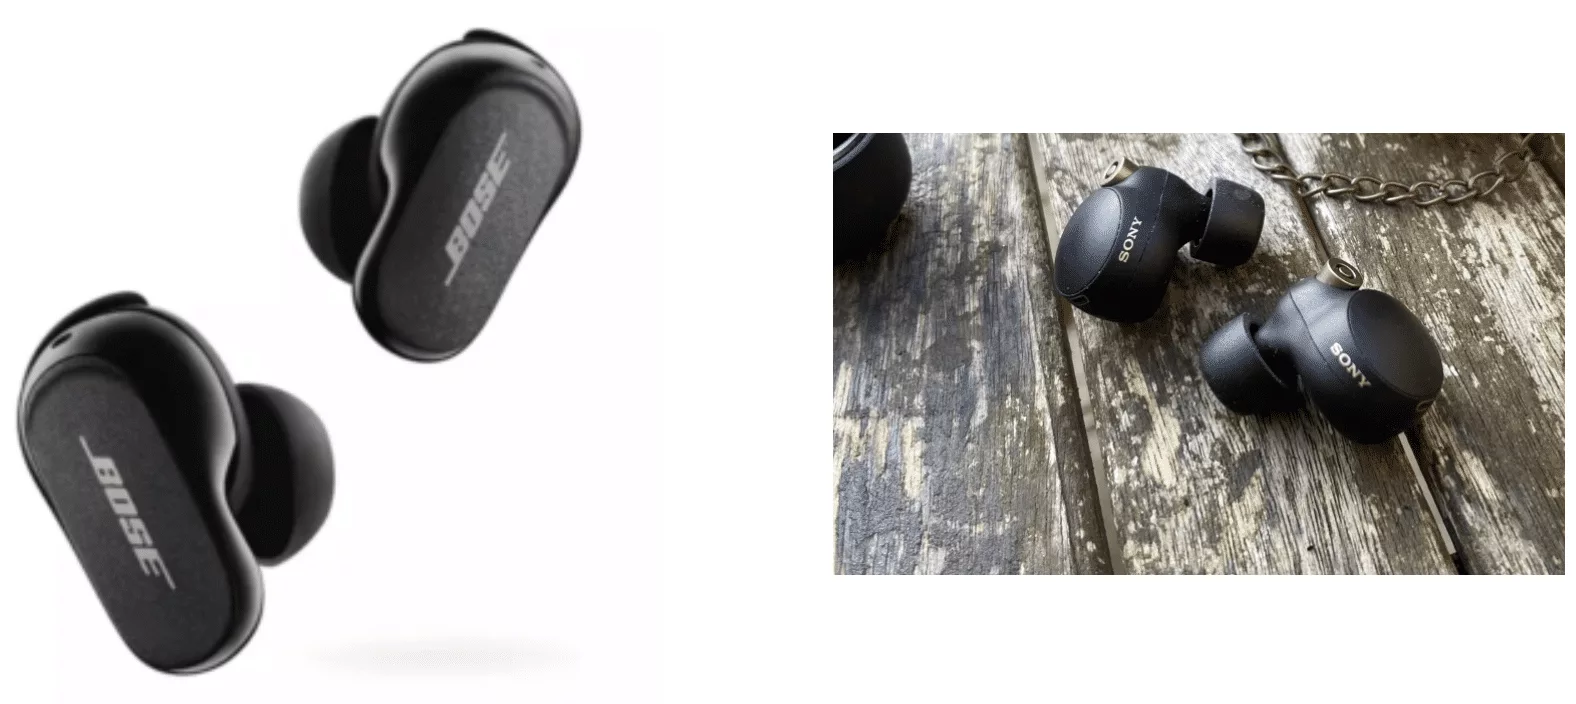 You are currently viewing BOSE QuietComfort II vs. Sony WF-1000XM4 Earbuds Comparison